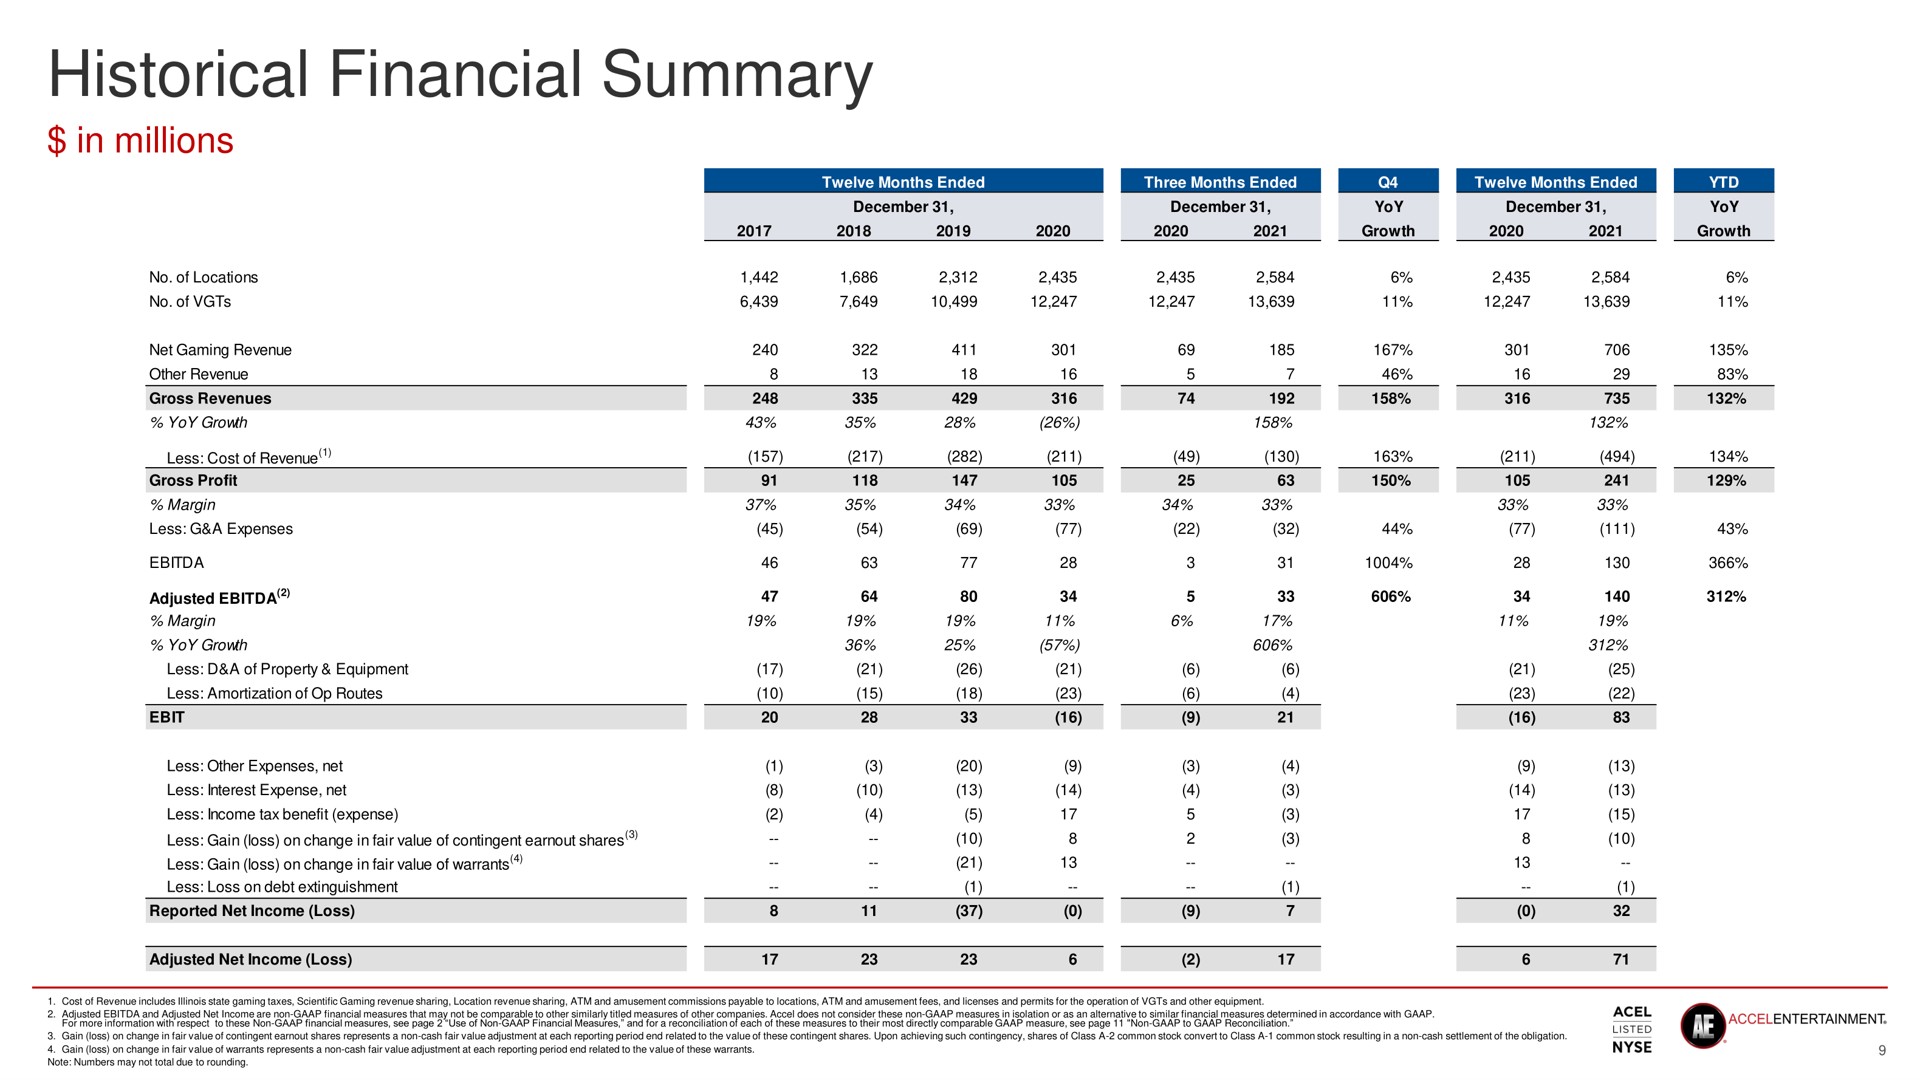 historical financial summary as twelve months ended | Accel Entertaiment